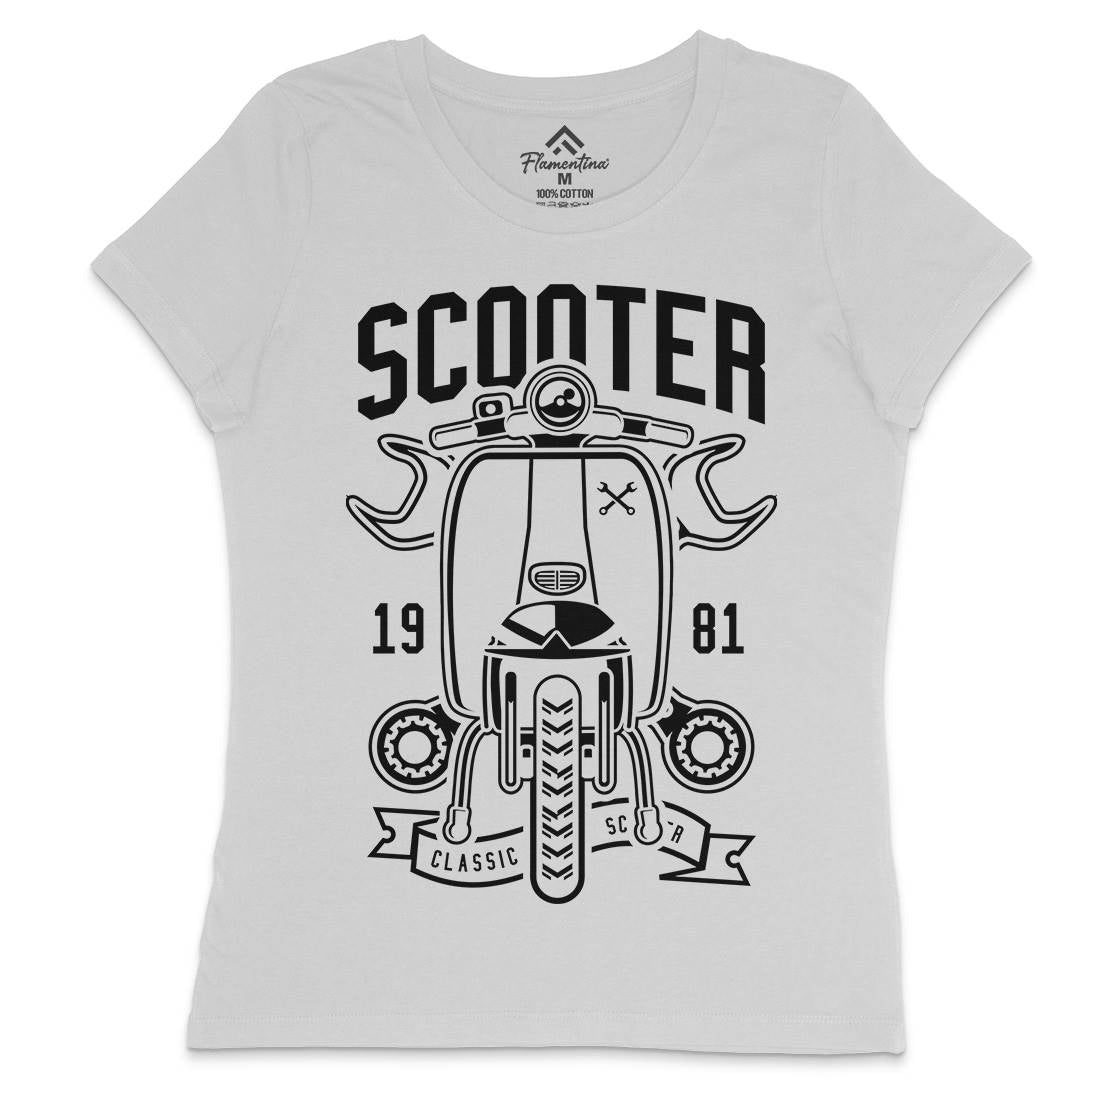 Scooter Classic Womens Crew Neck T-Shirt Motorcycles B618